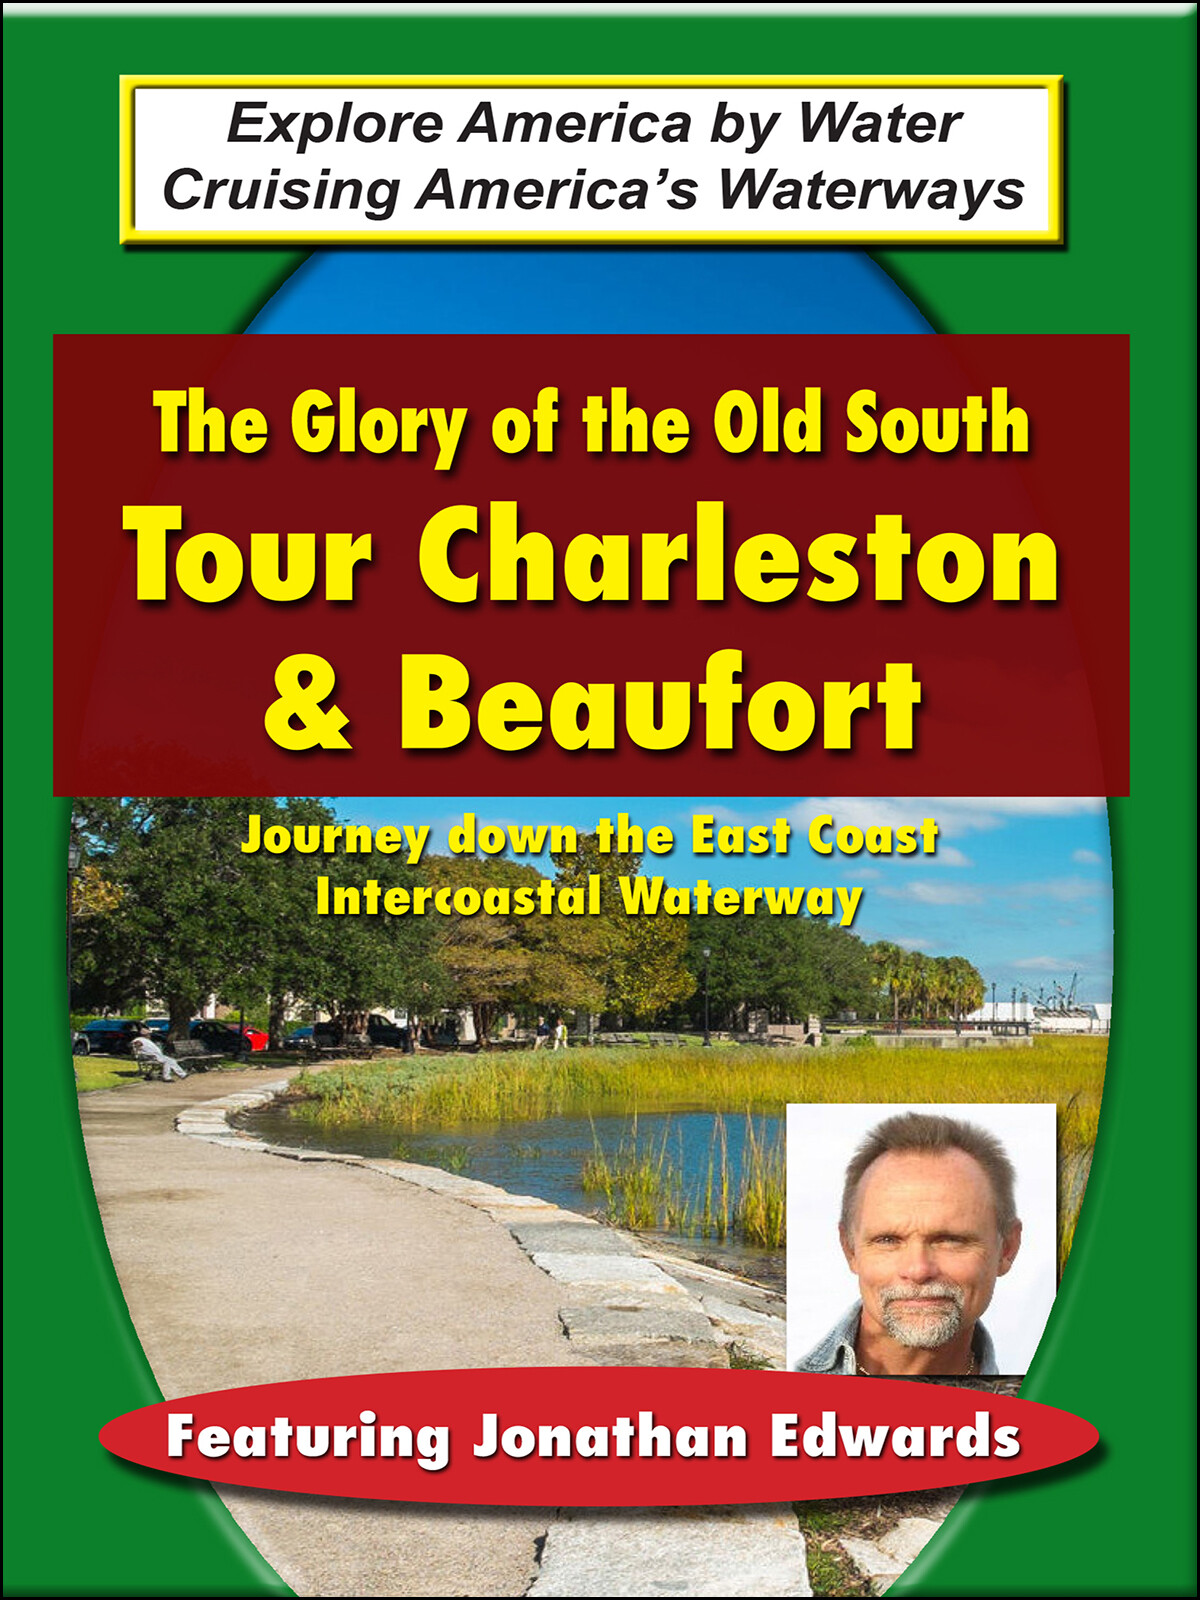 T8895 - The Glory of The Old South Tour Charleston & Beaufort